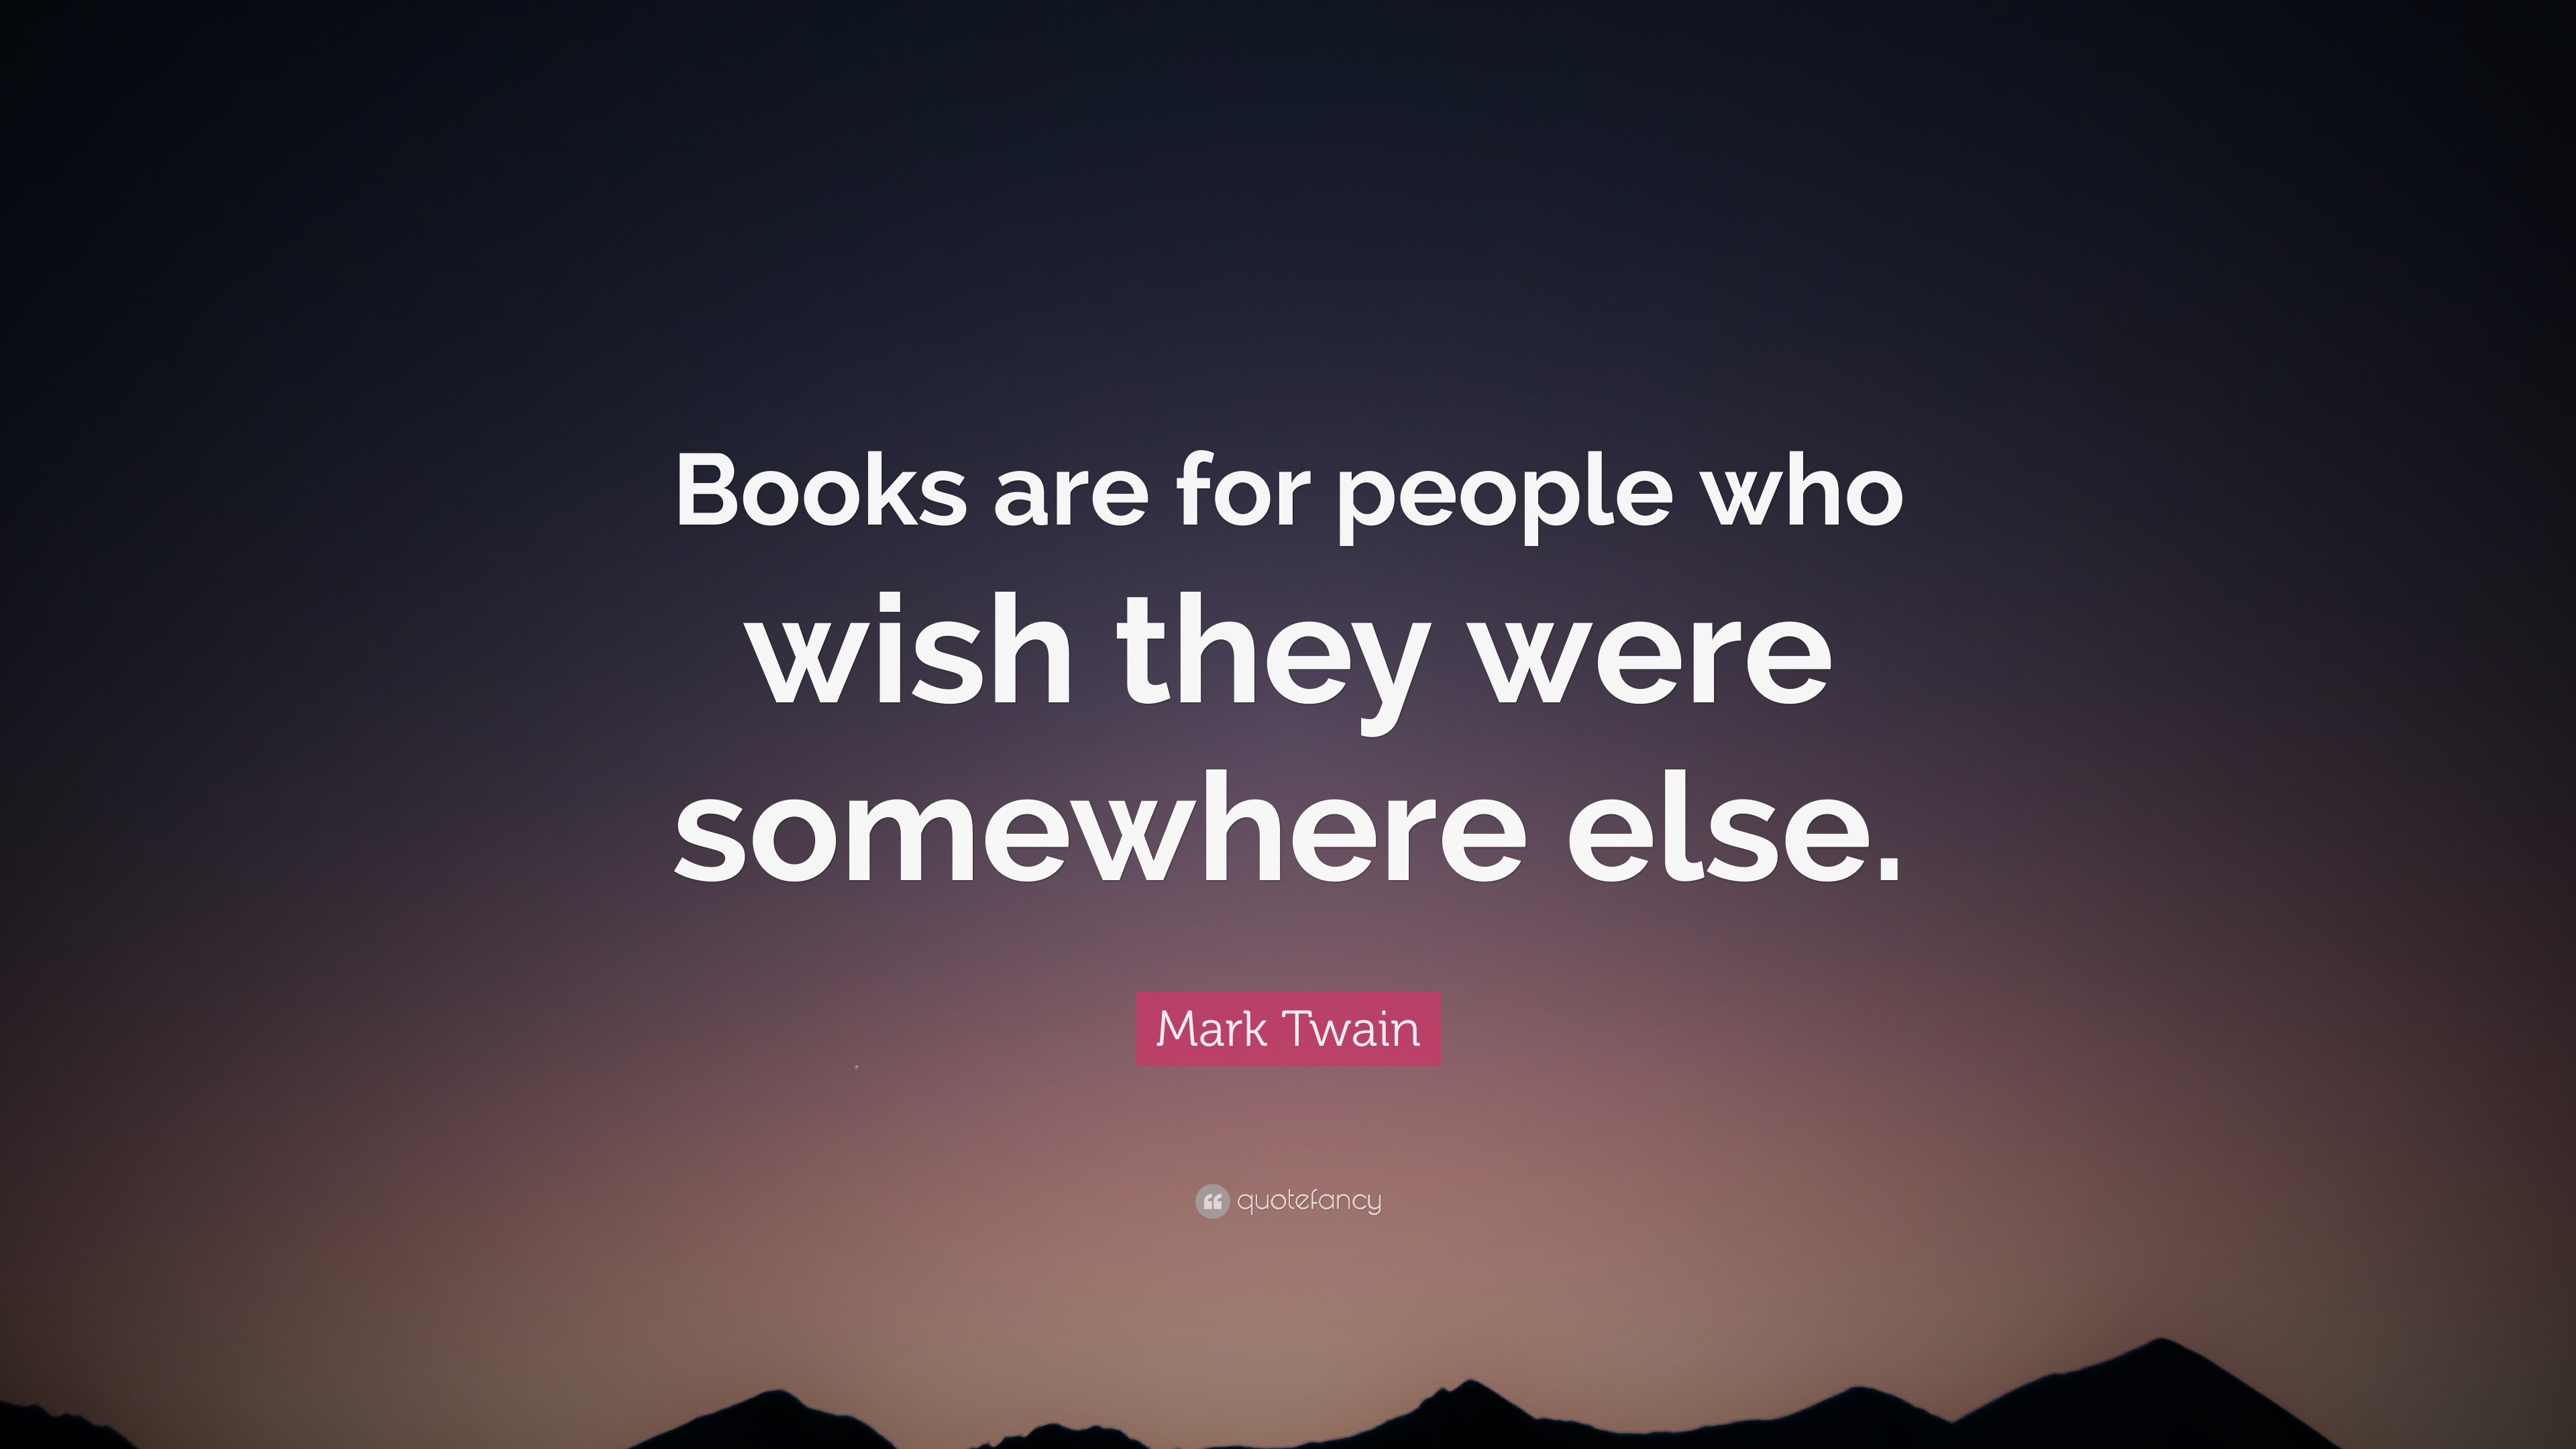 Mark Twain Quote: “Books are for people who wish they were somewhere else.”